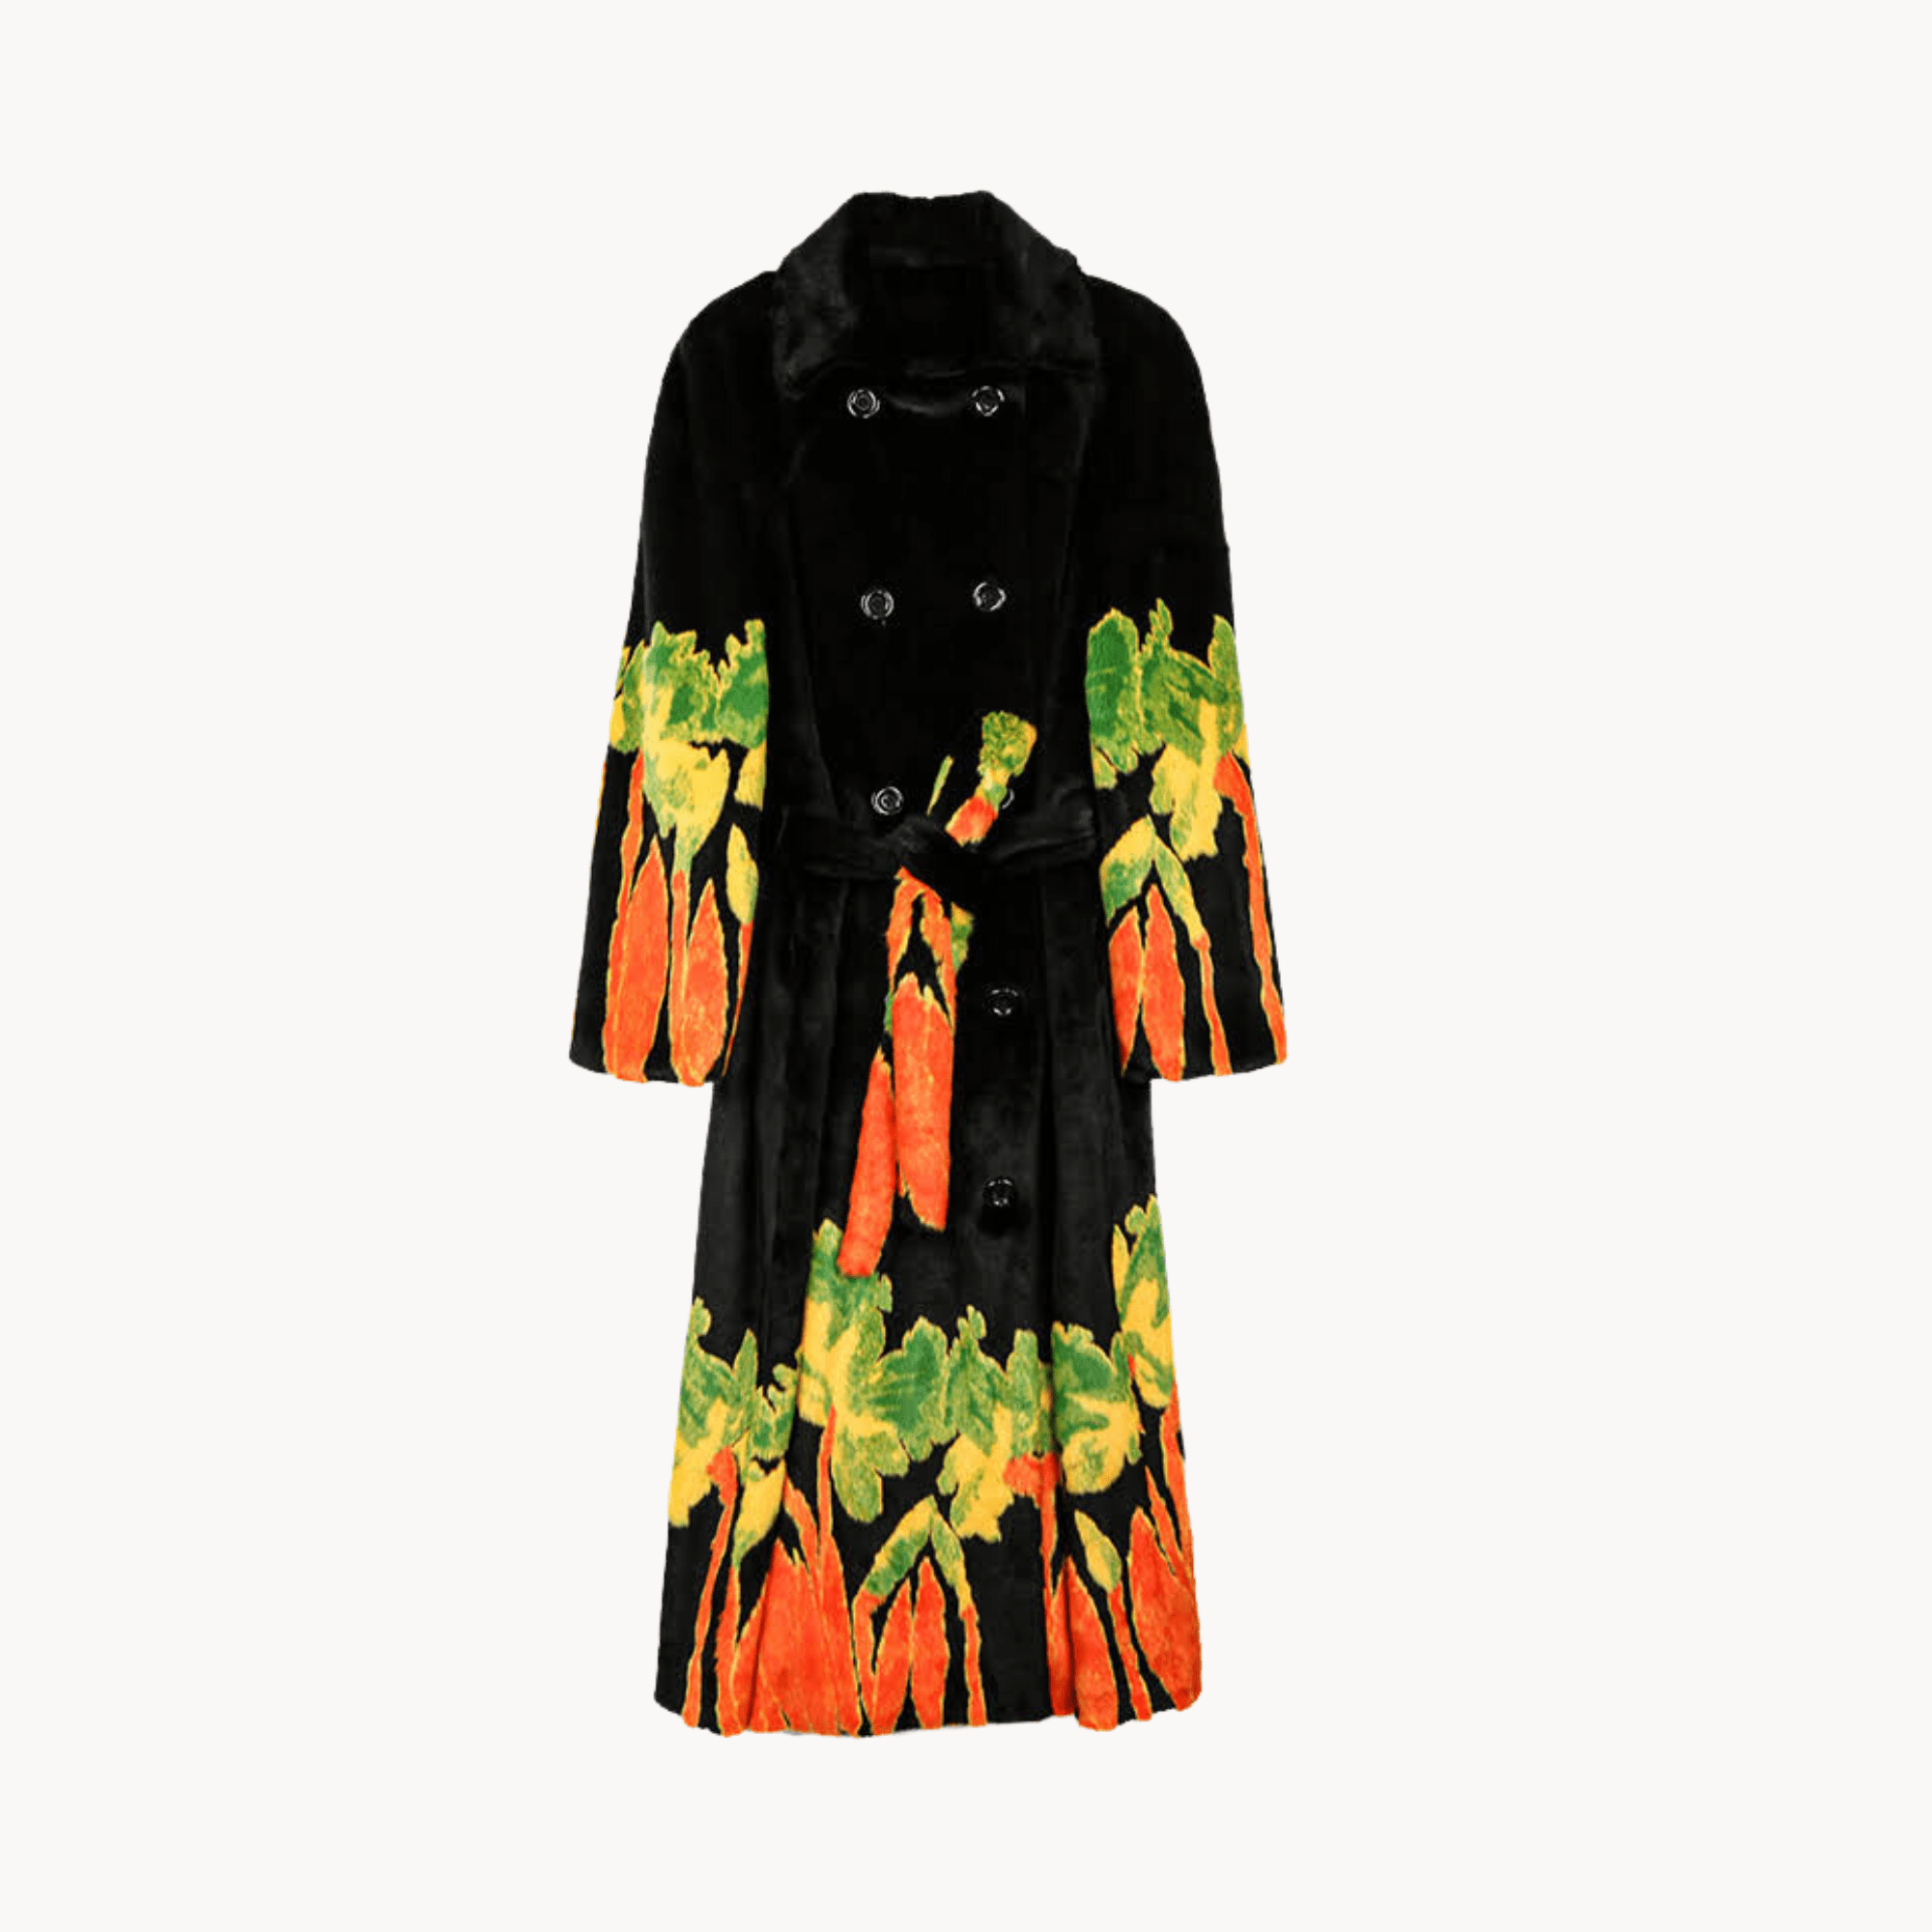 Floral Abstract Double-Breasted Coat - Kelly Obi New York